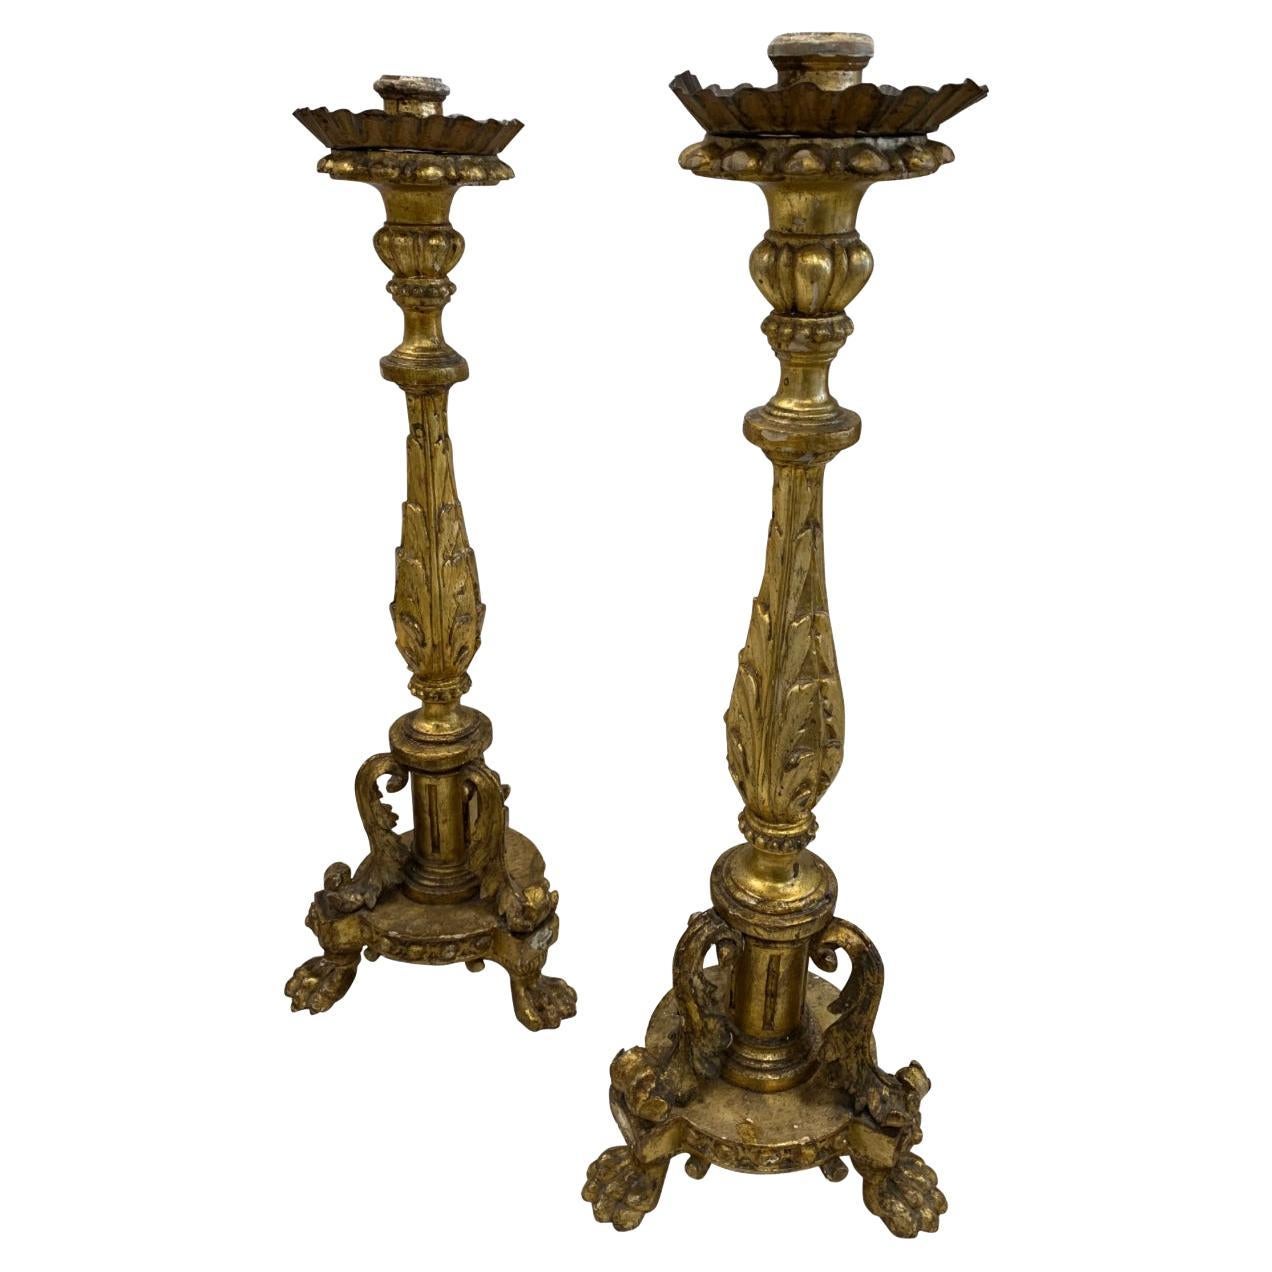 Vintage Brass Candlesticks, Pair of Candle Holders with Glass Bobeches